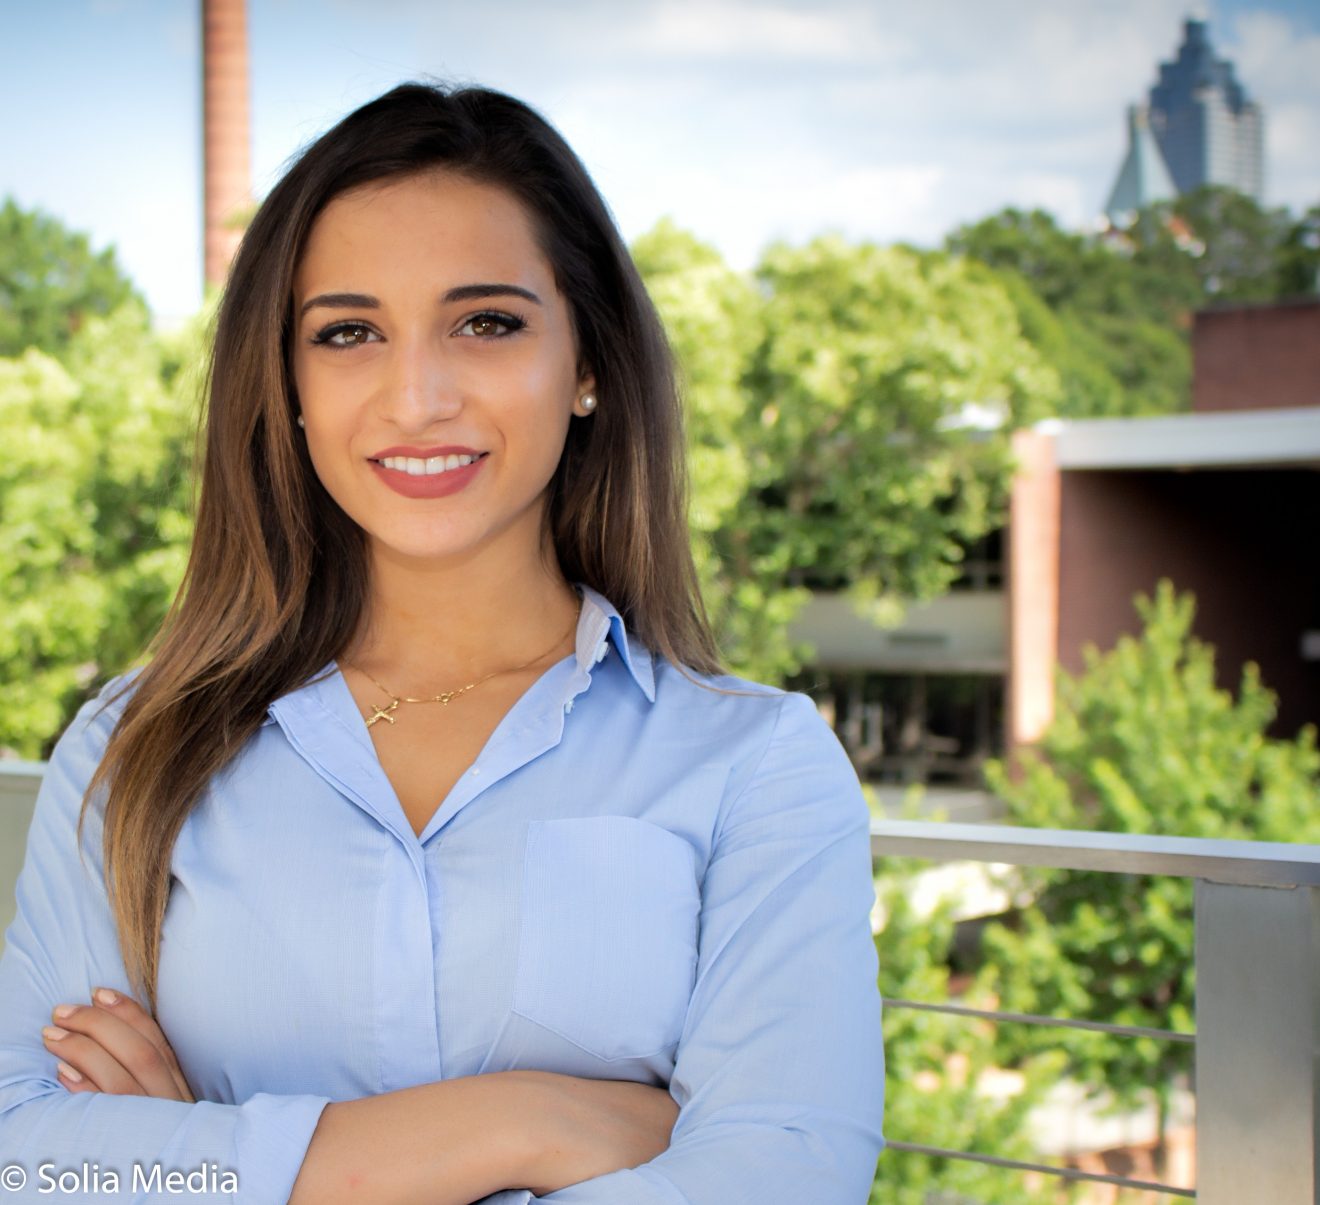 Sophia Meral Chapar - Solia Media Special Projects Manager and Georgia Tech Industrial Engineering Student